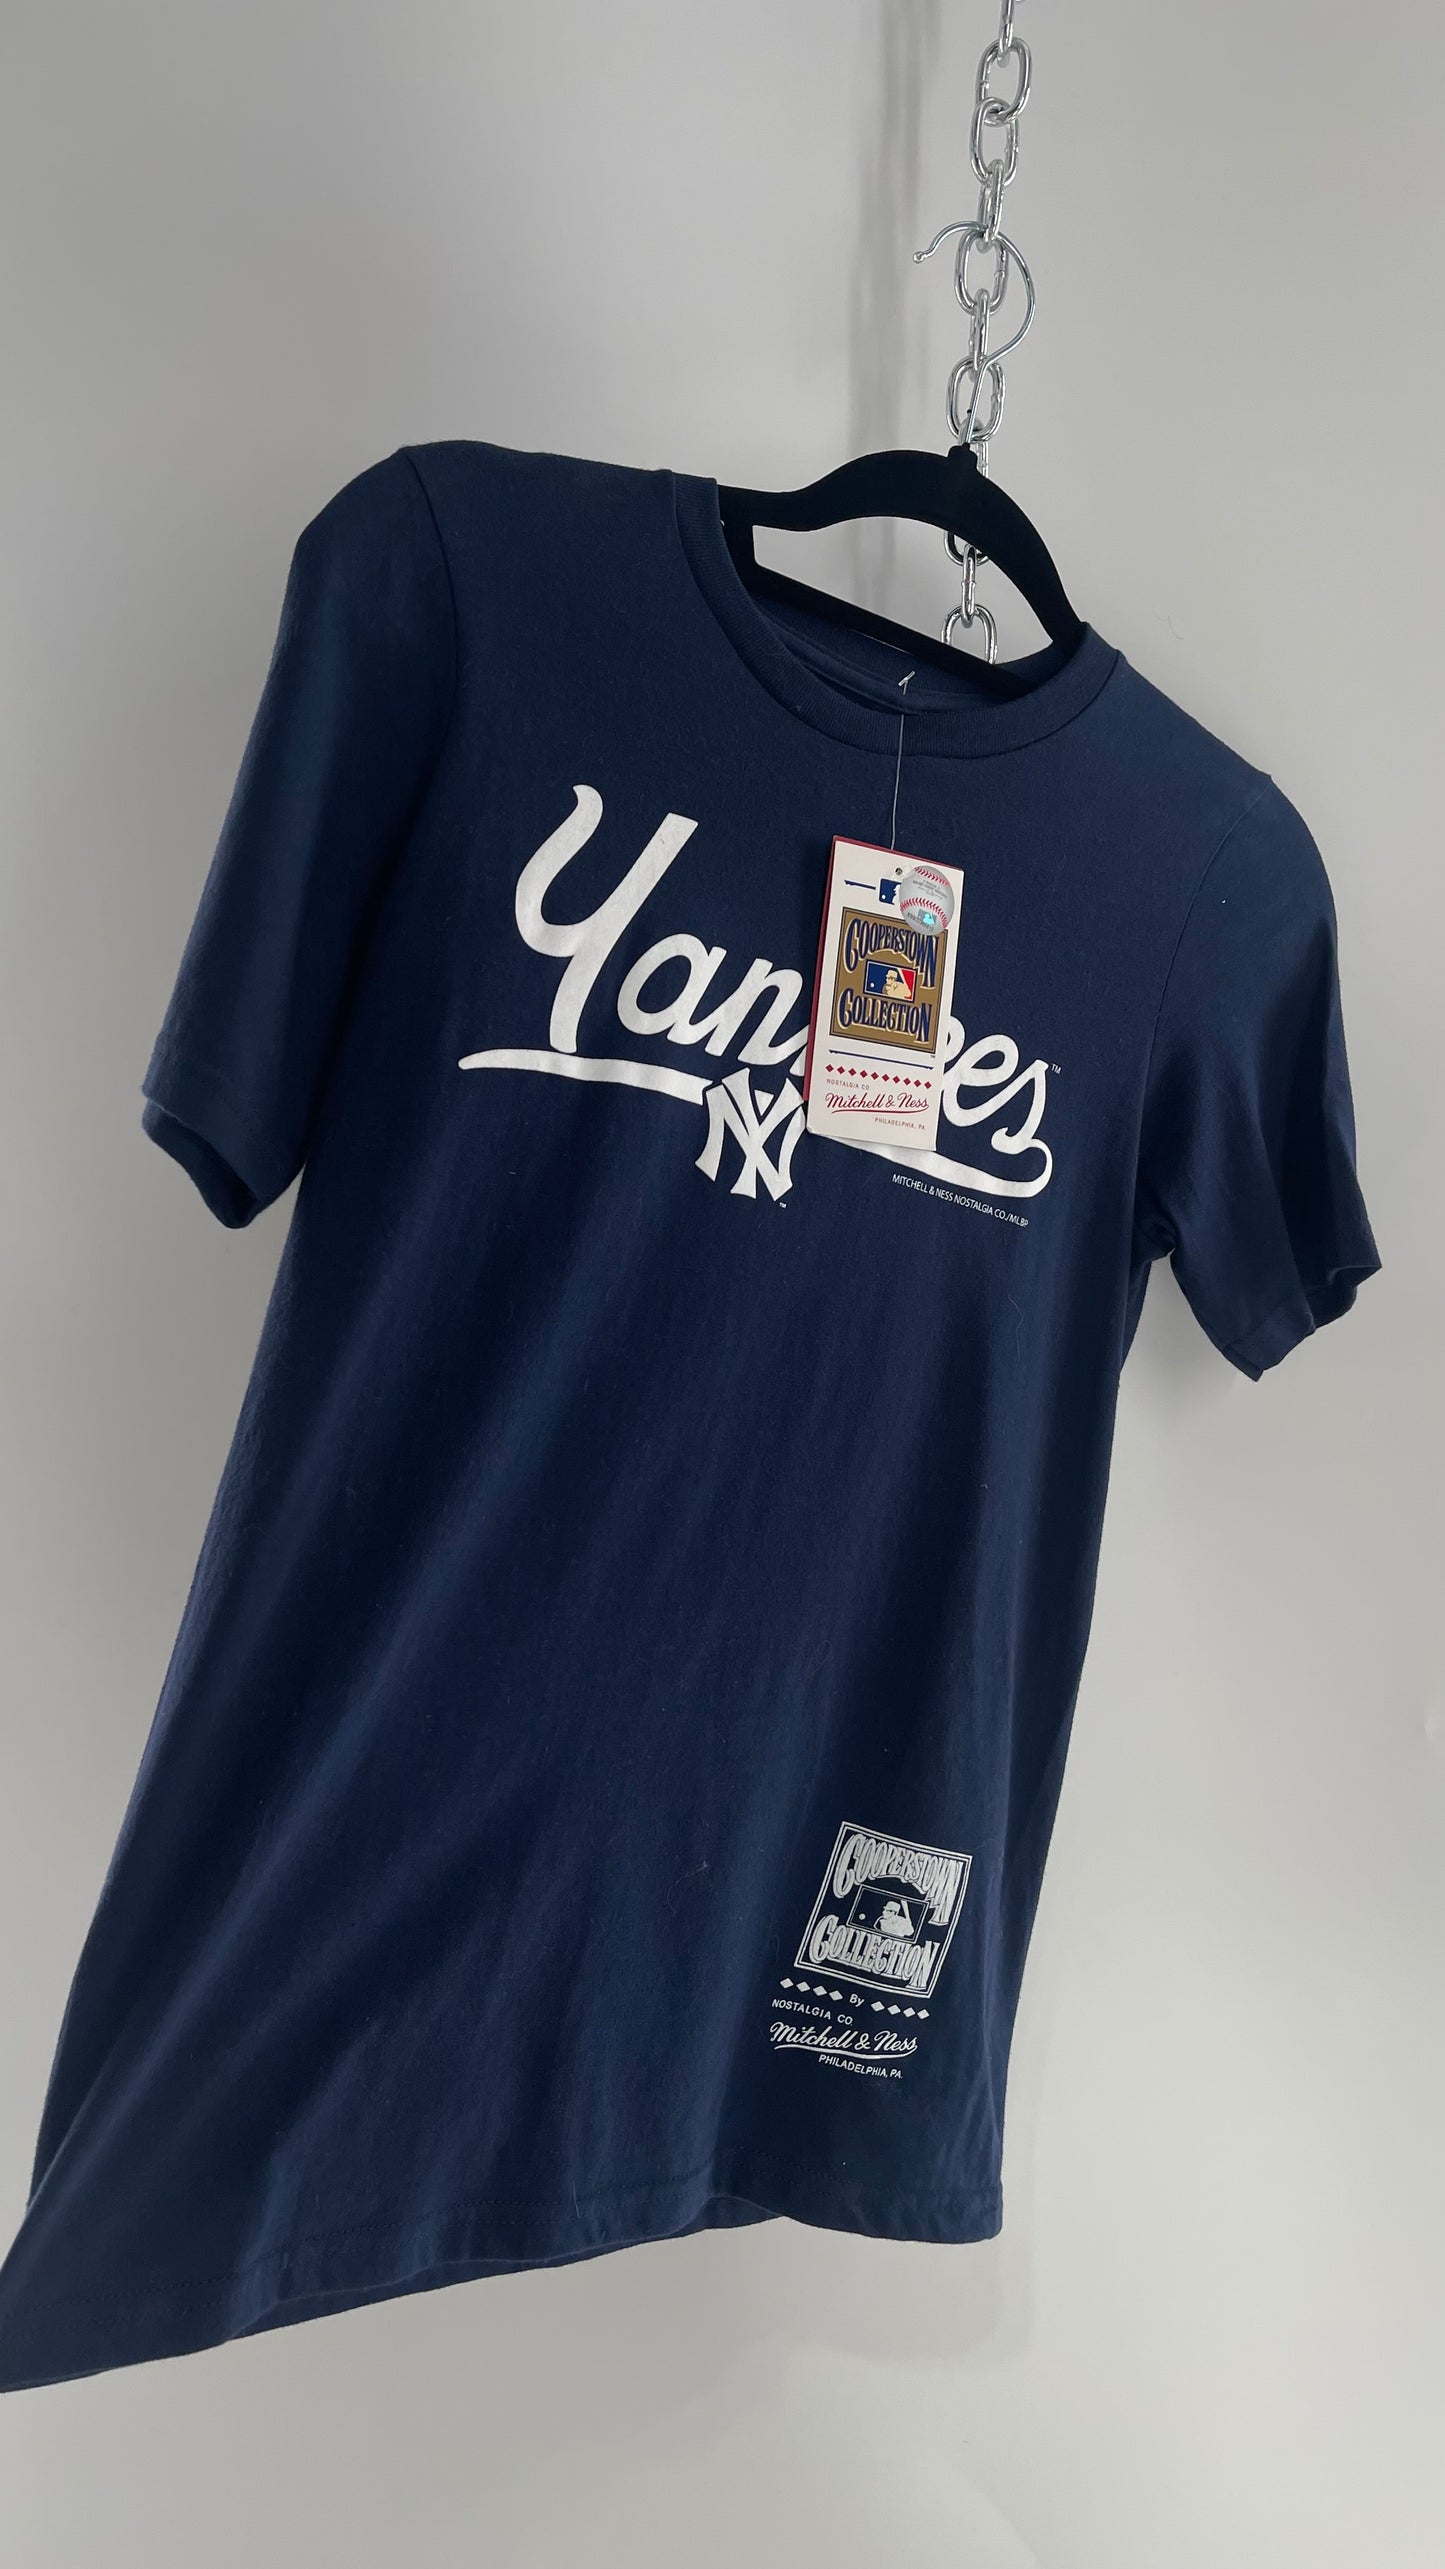 Official Navy Blue Yankees Baby T with Tags Attached Cooperstown Mitchell & Ness (S adult or 10/12 kids)